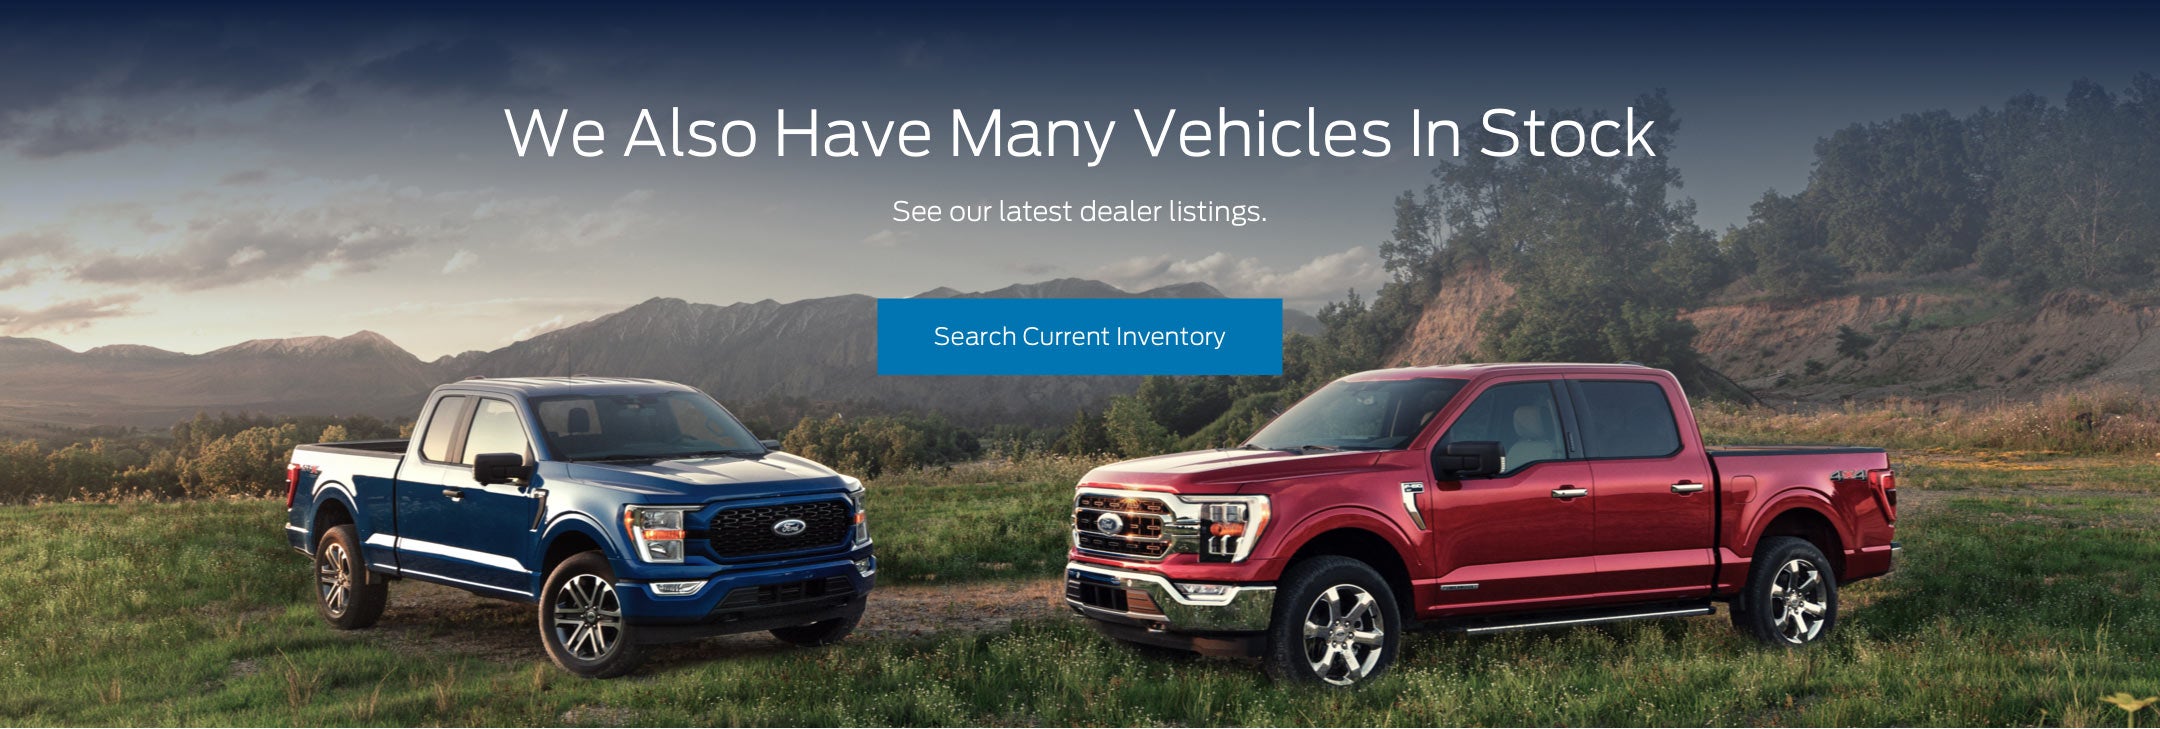 Ford vehicles in stock | Huntersville Ford in Huntersville NC